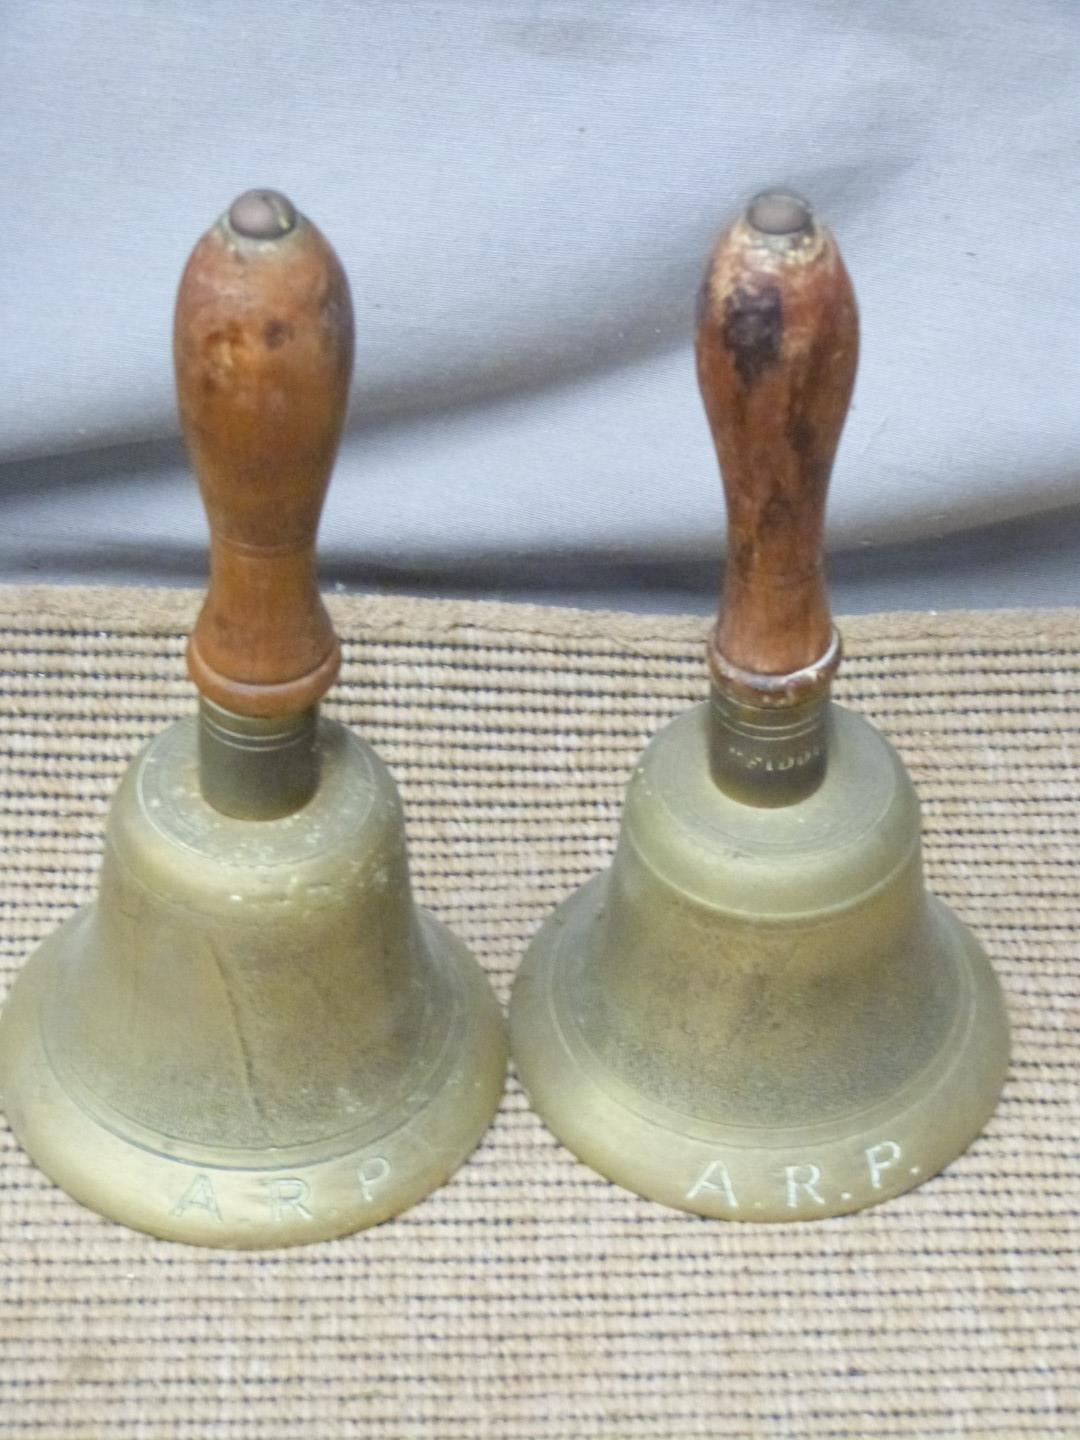 Two brass ARP bells, coaching lamps, Standish, and a hallmarked silver trophy, tallest 52cm - Image 2 of 3